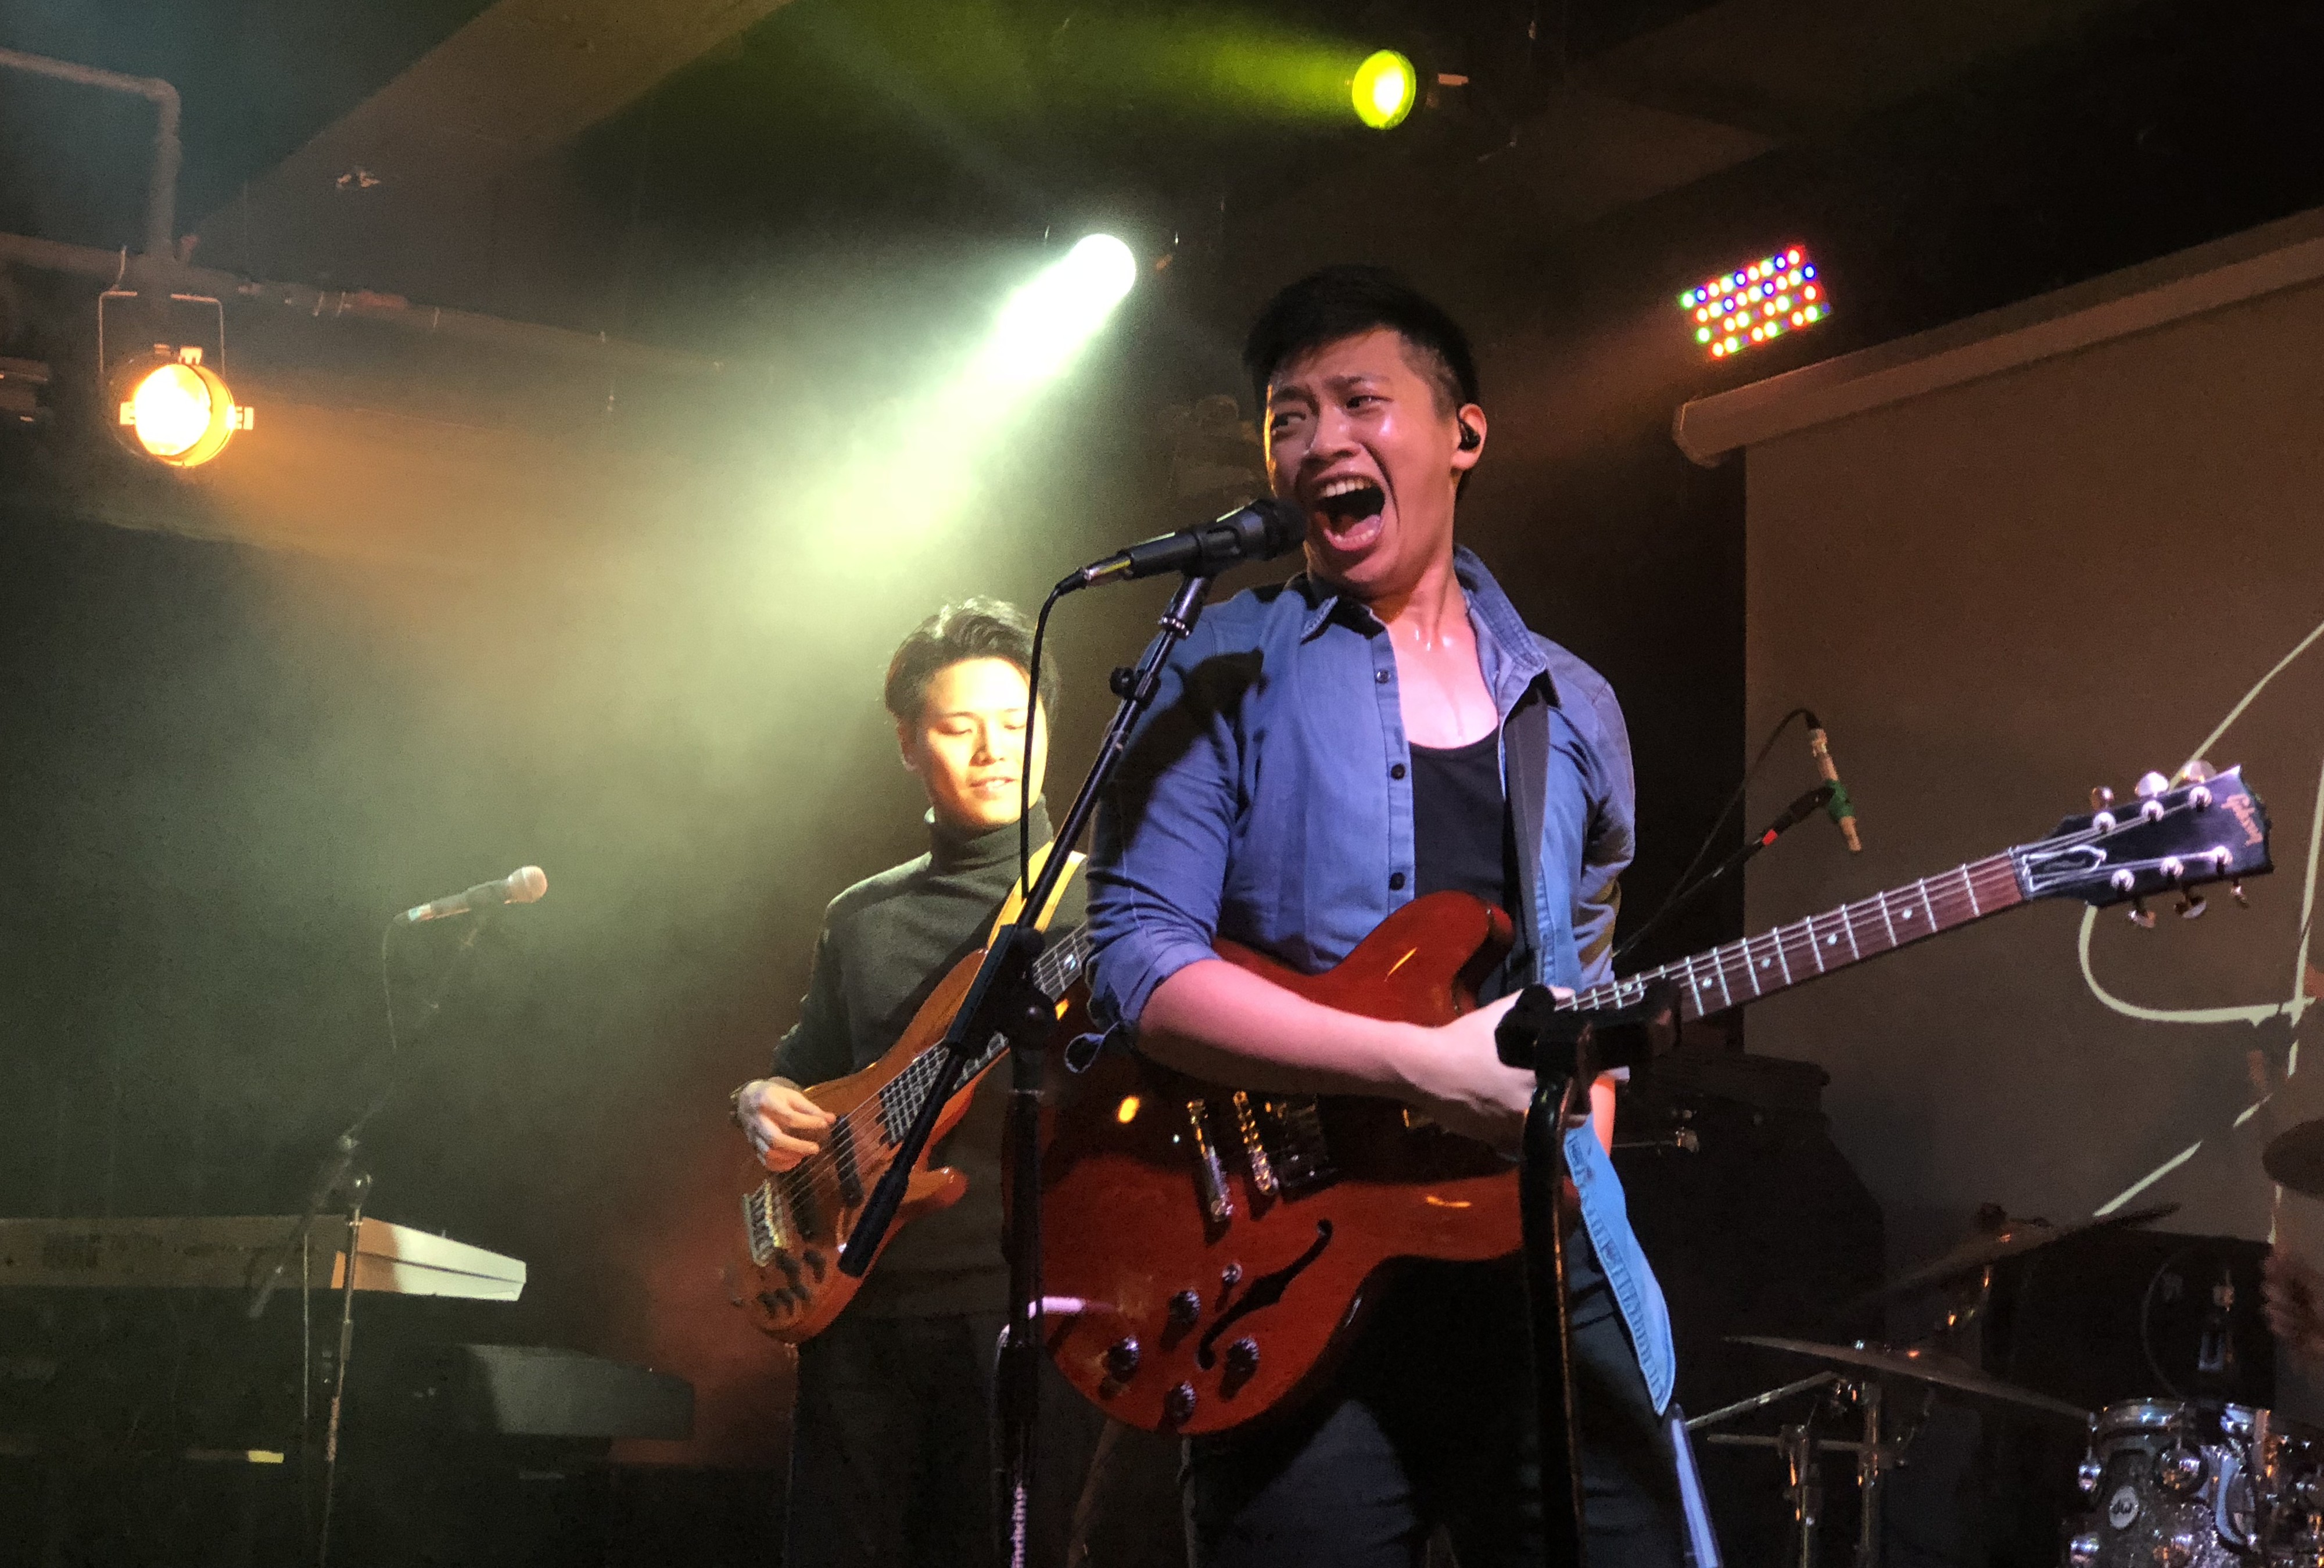 Jonathan Synn of Sulis Club performs in Guangzhou. Photo: Handout